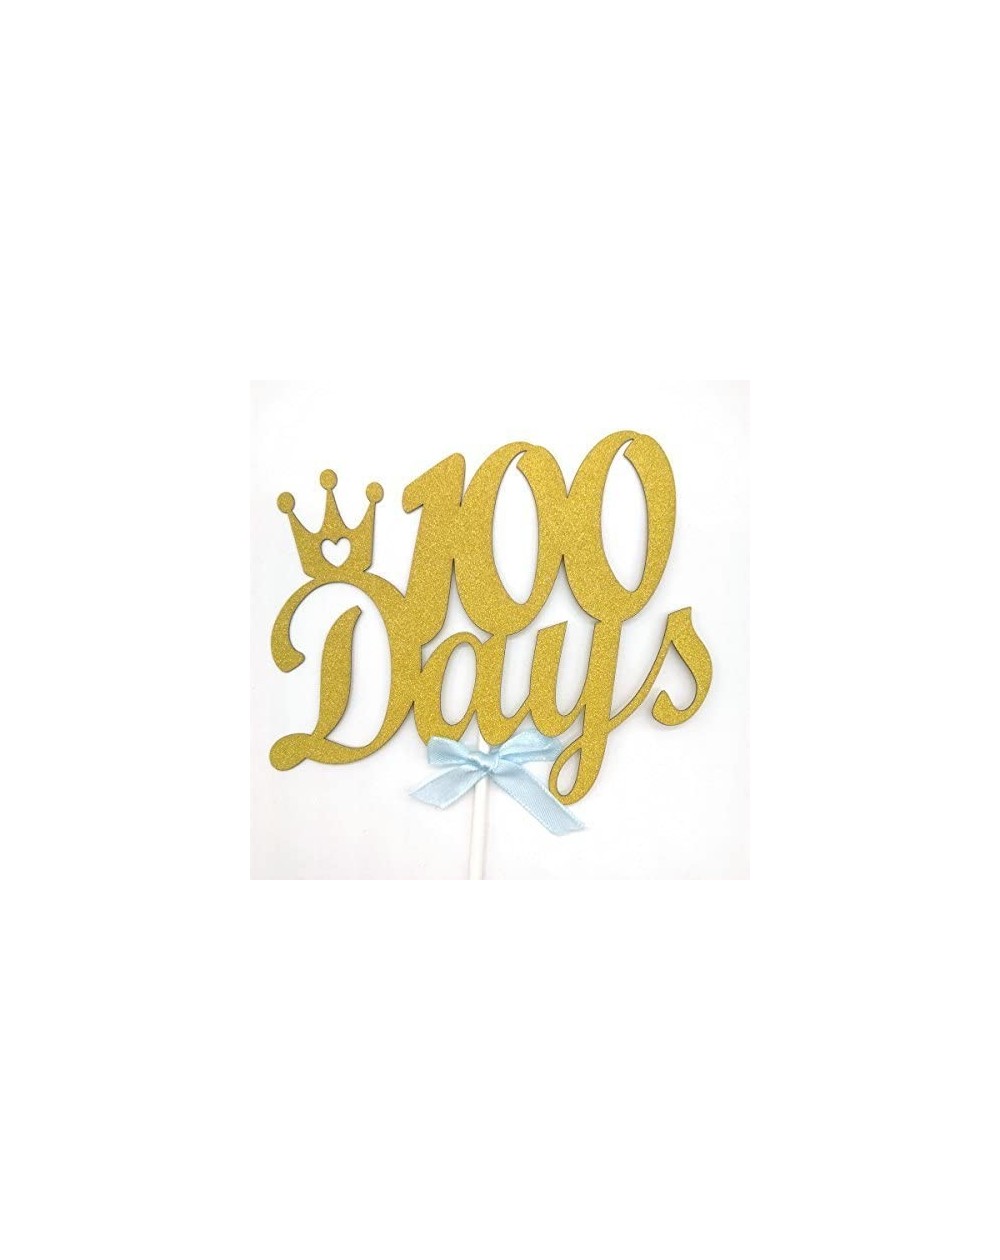 Cake & Cupcake Toppers 100 Days Cake Topper for 100 Days Birthday Party Birthday Gold Glitter Cupcake and Cake Topper Birthda...